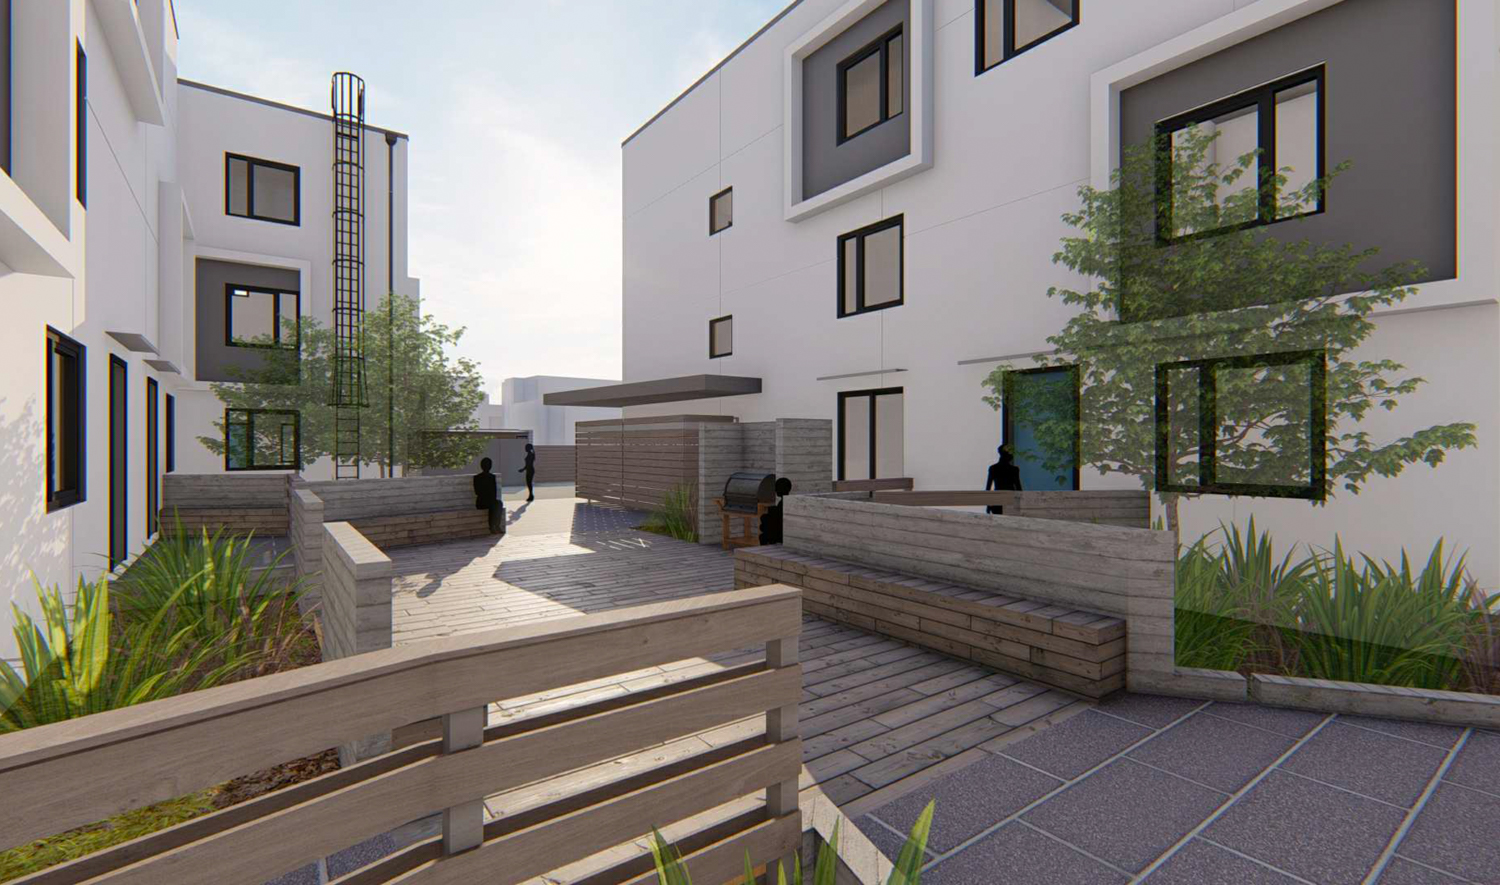 825 6th Avenue inner-block courtyard, rendering by Baran Studio Architecture